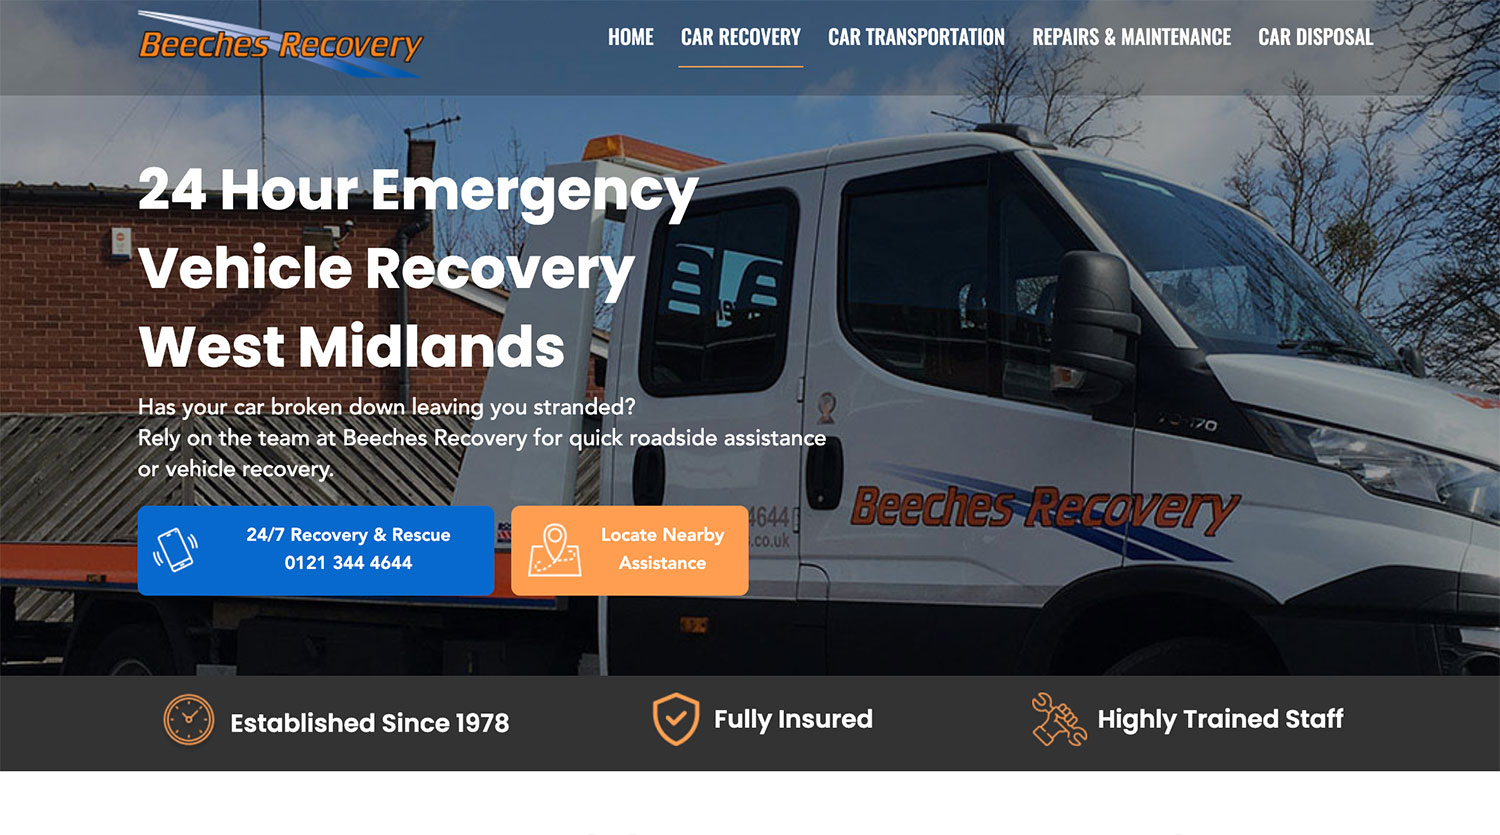 Beeches Recovery landing page